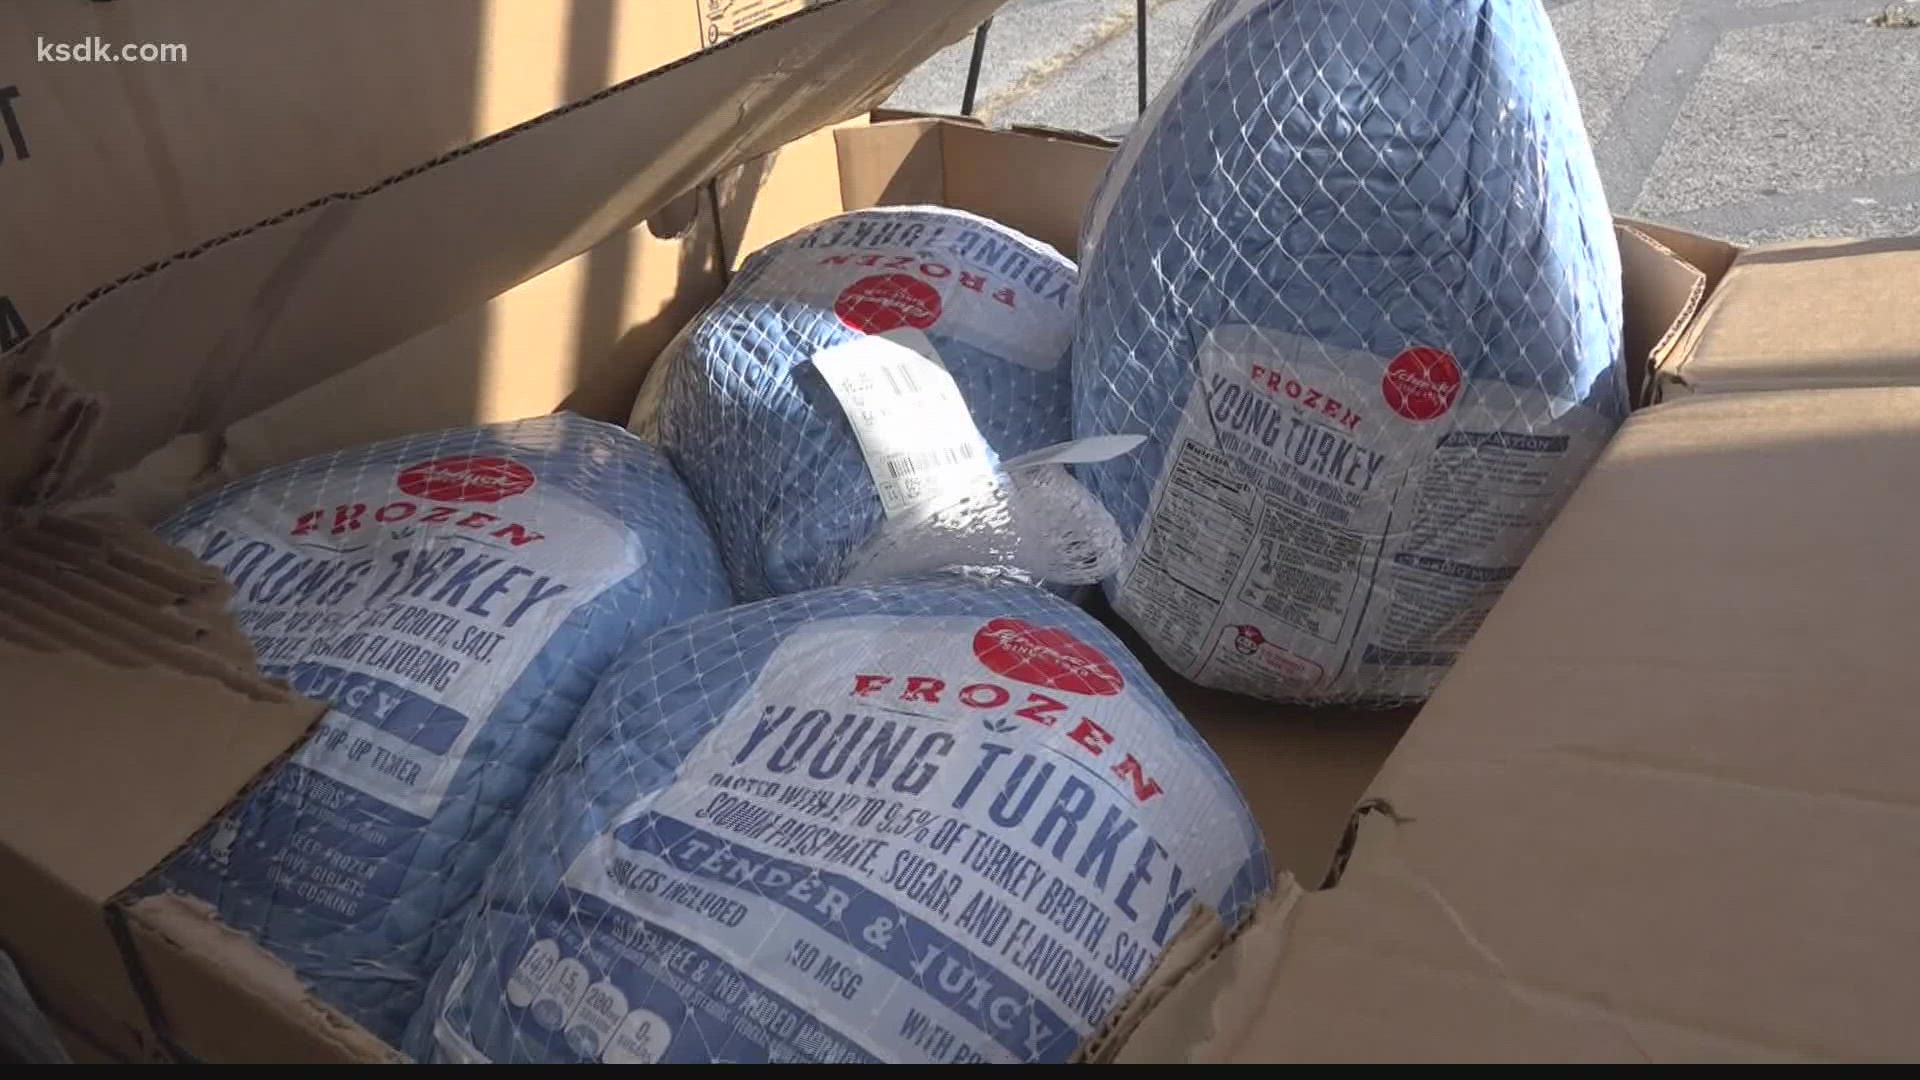 Technology was added to the menu of the 24th annual turkey giveaway.